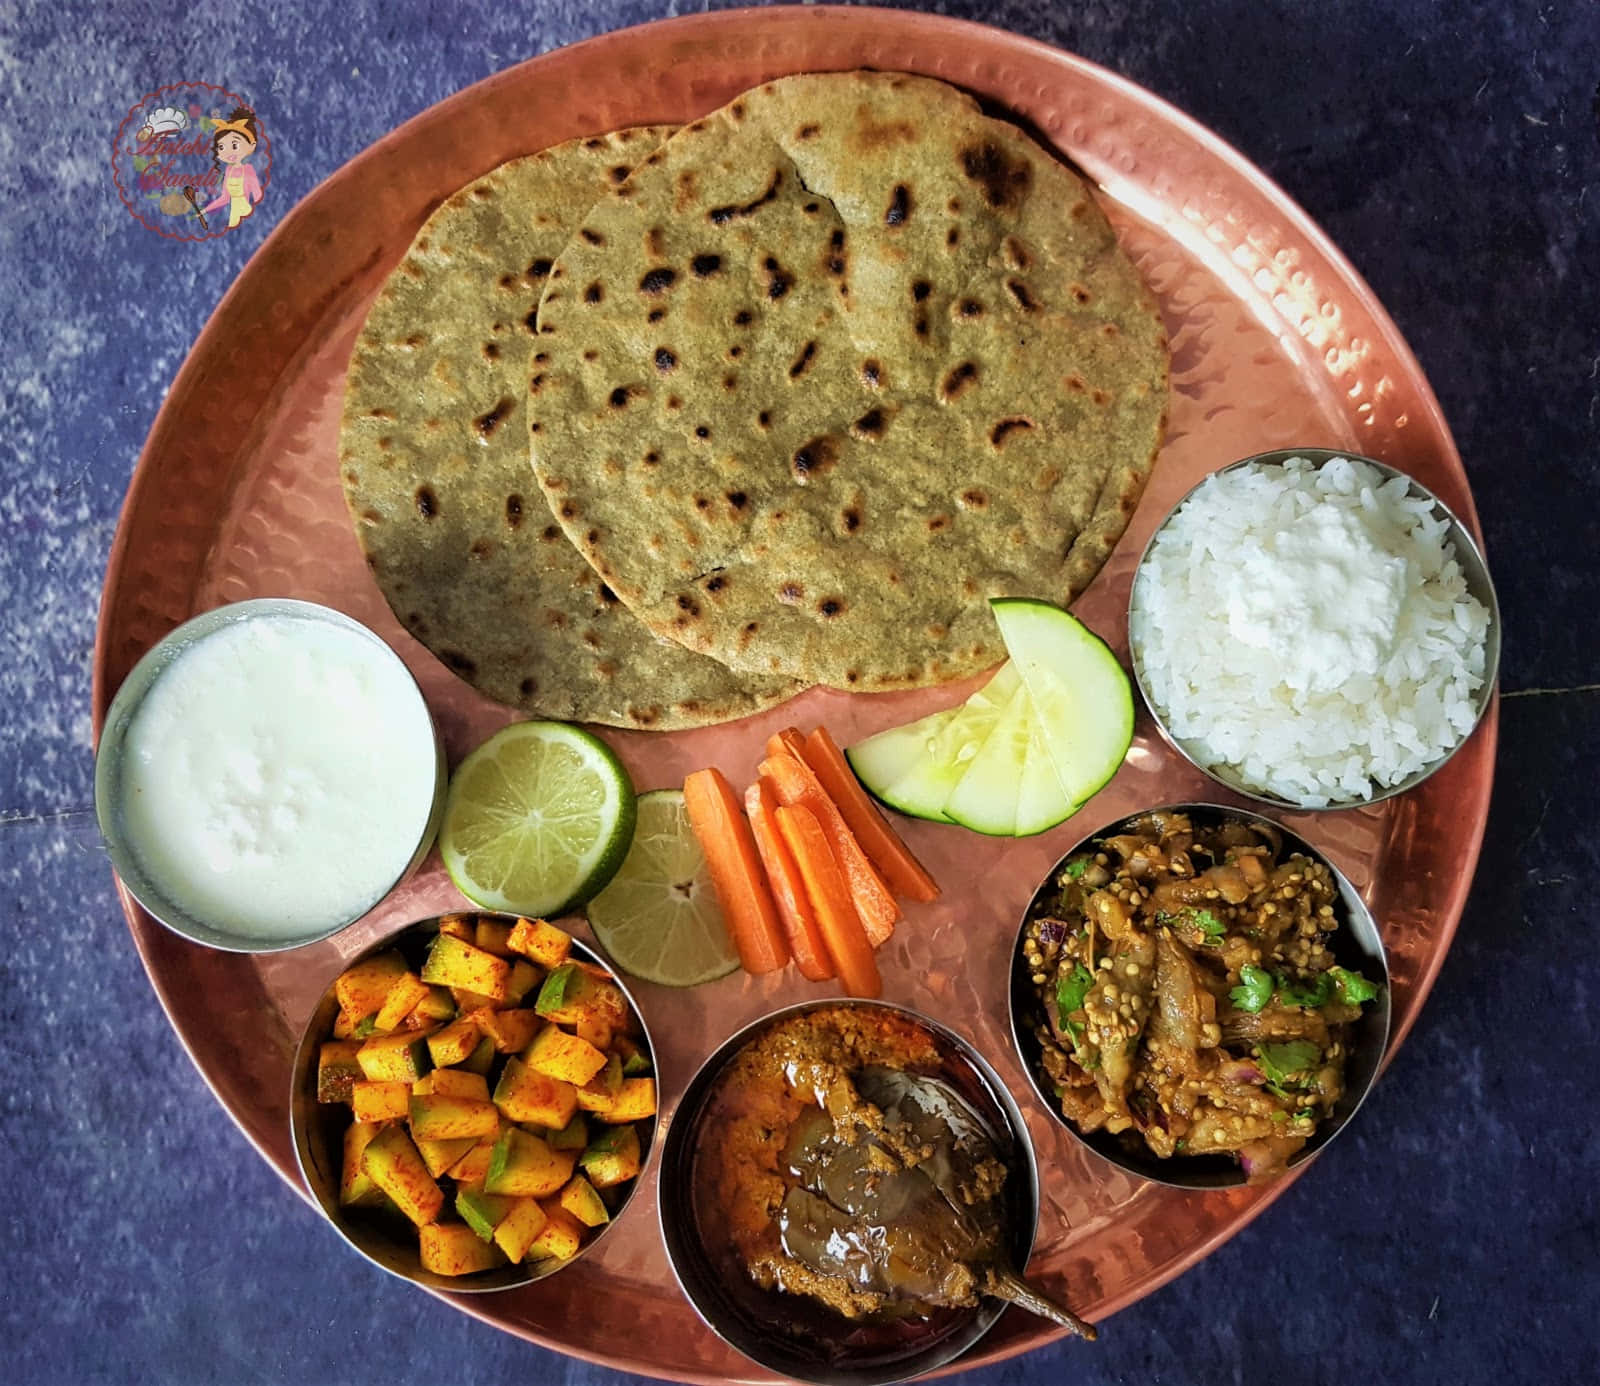 Traditional Indian Thali Meal Wallpaper